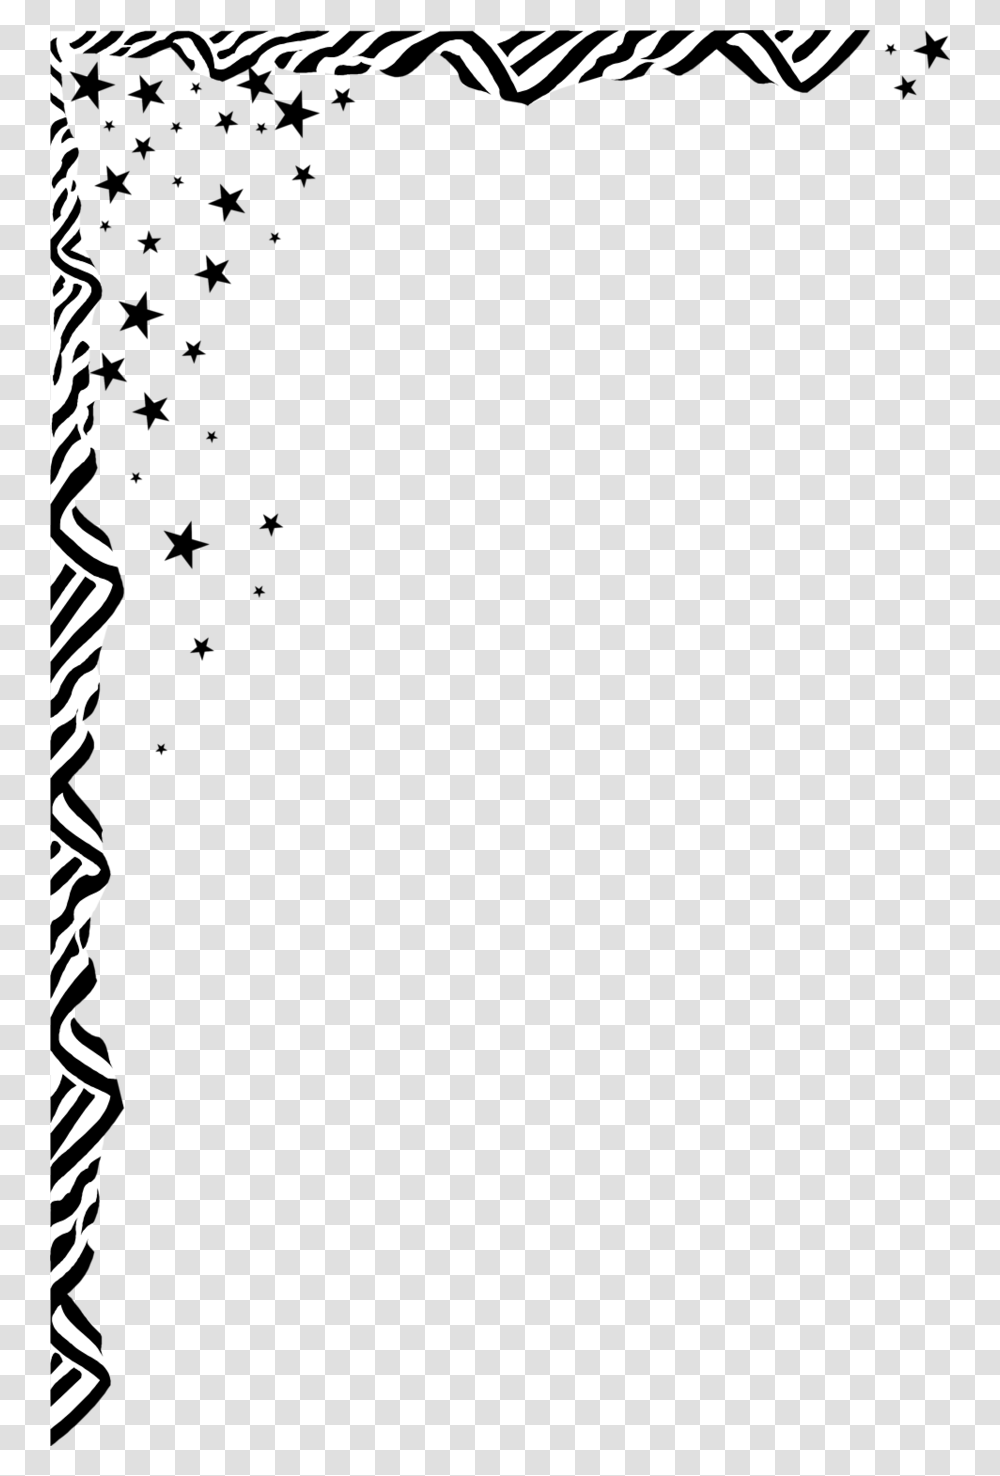 Download Frames Black And White Stars Clipart Borders And Frames, Apparel, Architecture Transparent Png